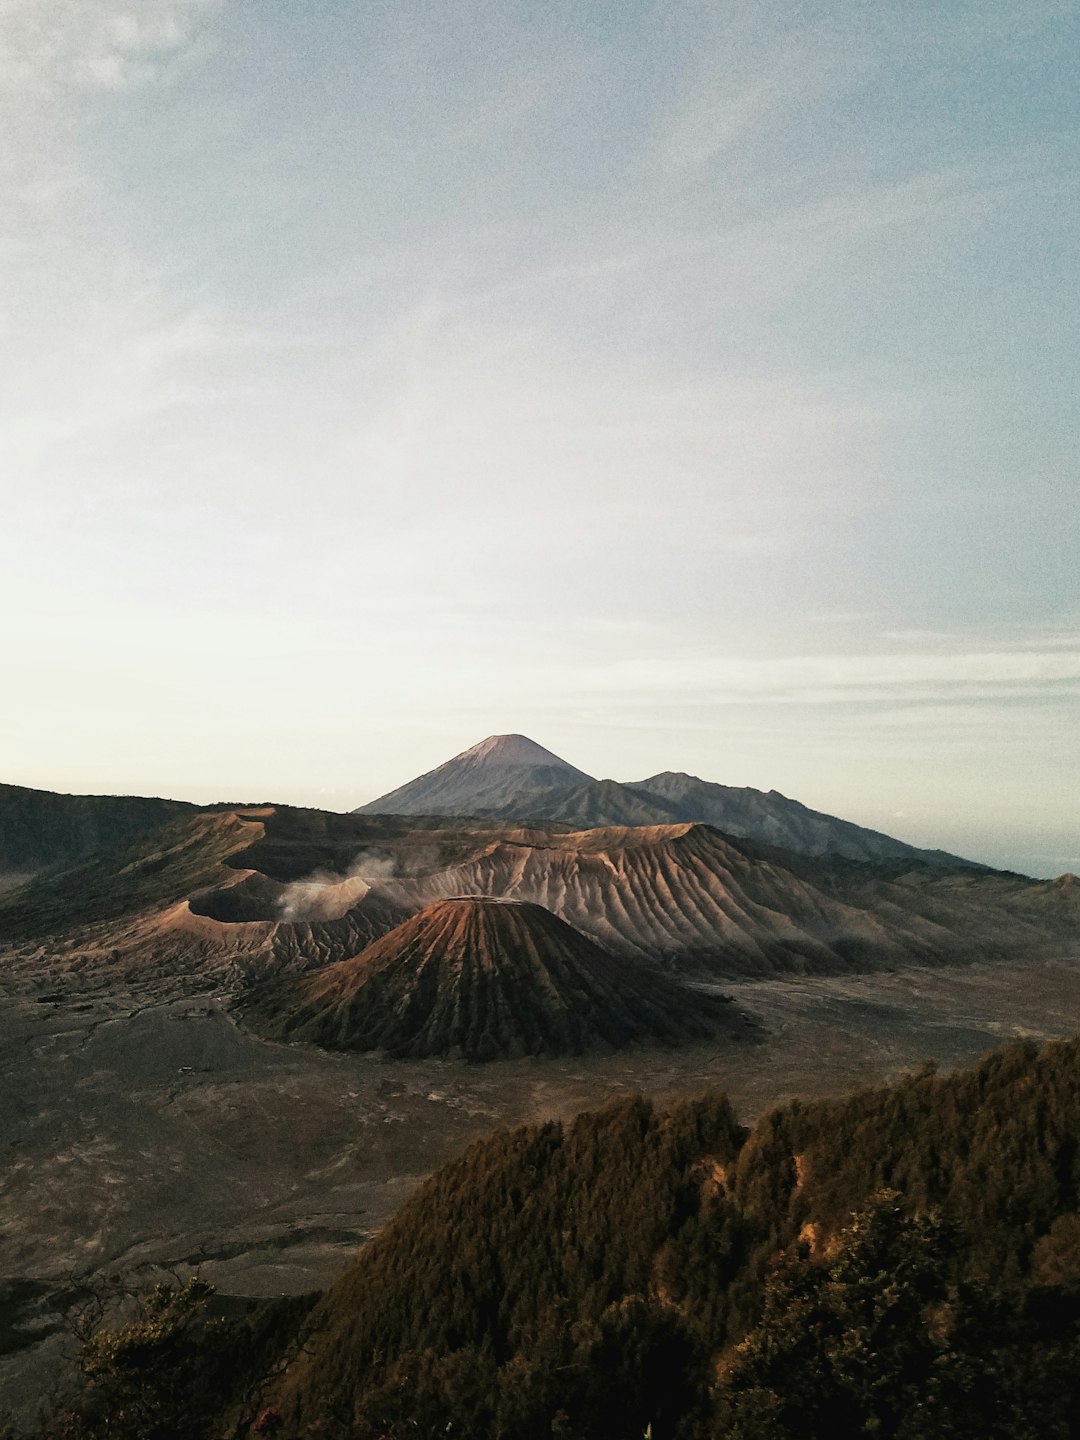 Travel Tips and Stories of Mount Bromo in Indonesia